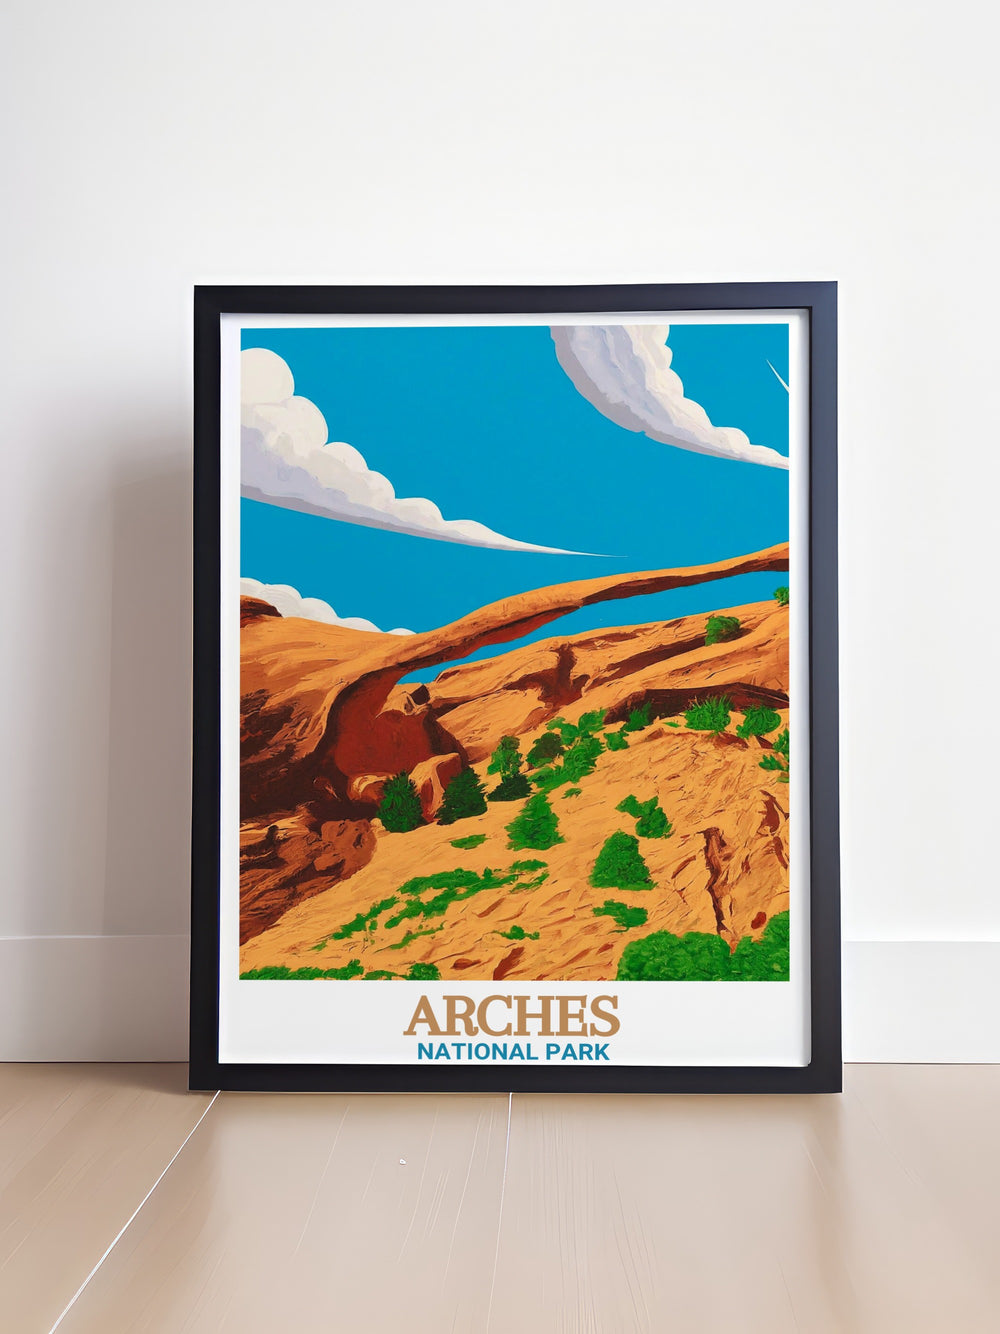 Stunning Landscape Arch wall art featuring the majestic rock formation in Arches National Park ideal for adding a touch of natural beauty to any room and serving as a unique piece of National Park decor.